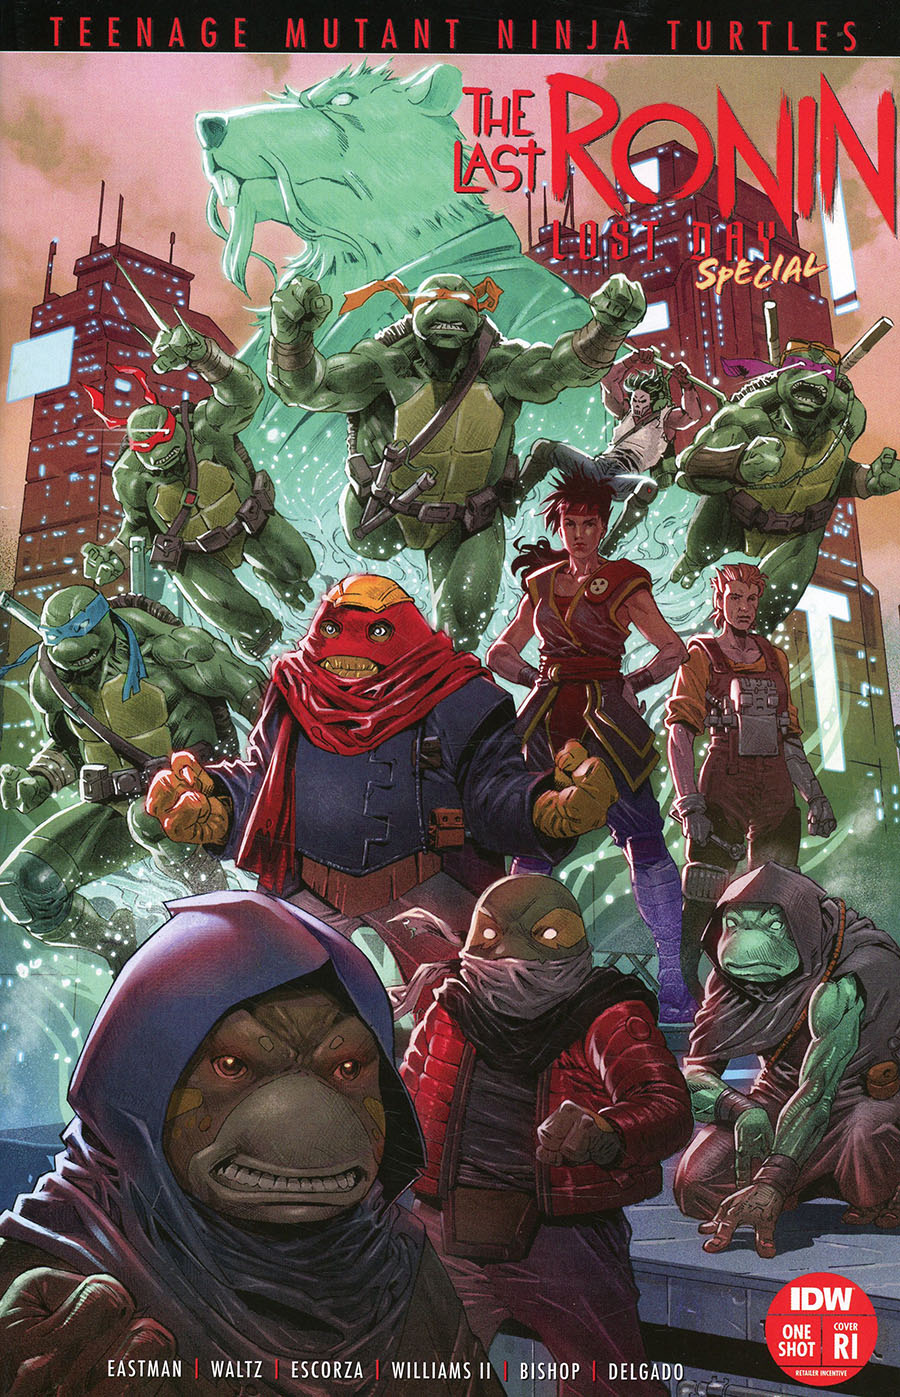 Teenage Mutant Ninja Turtles The Last Ronin The Lost Day Special #1 (One Shot) Cover D Incentive Brothers Escorzas Variant Cover